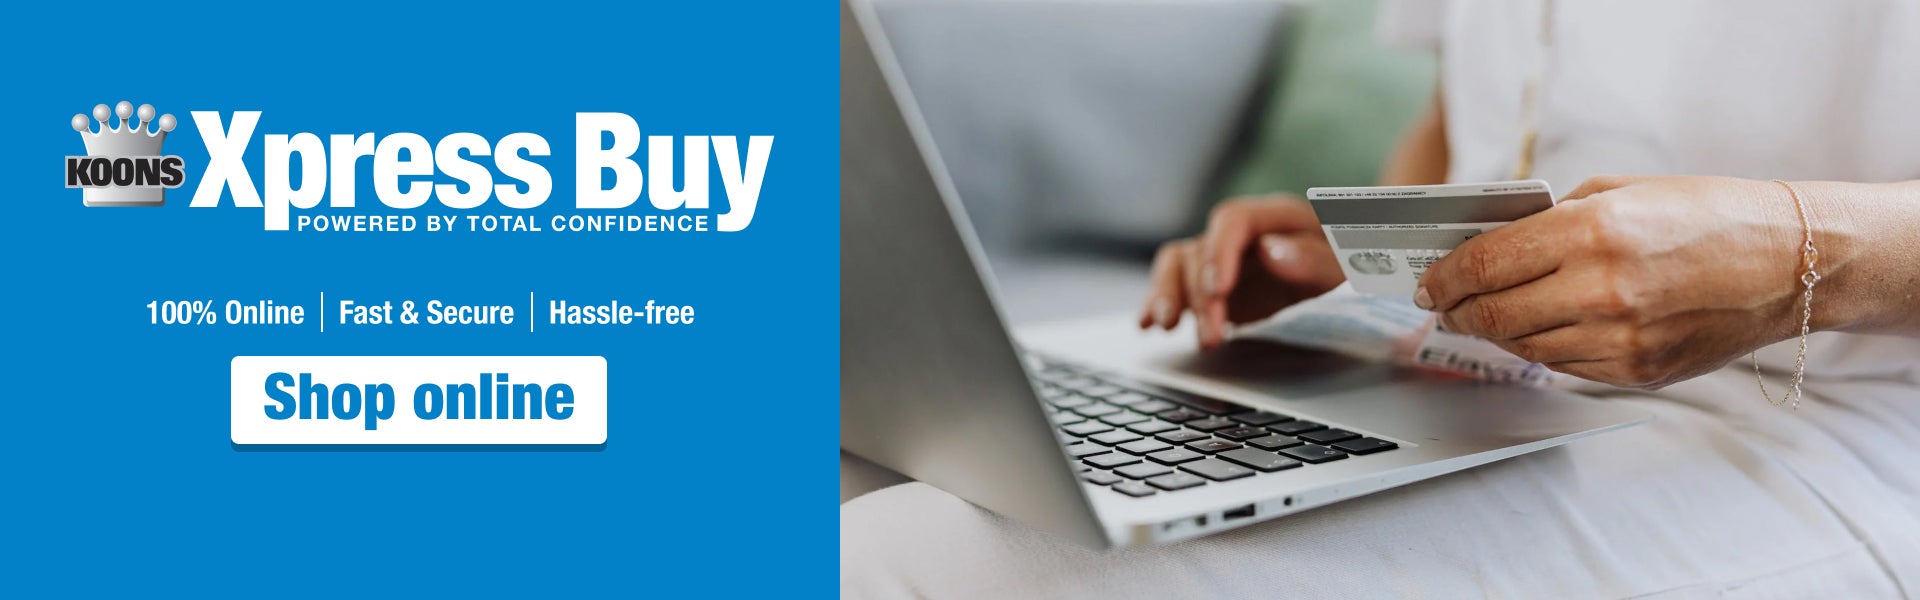 Xpress Buy. 100% online / Fast & Secure / Hassle-free